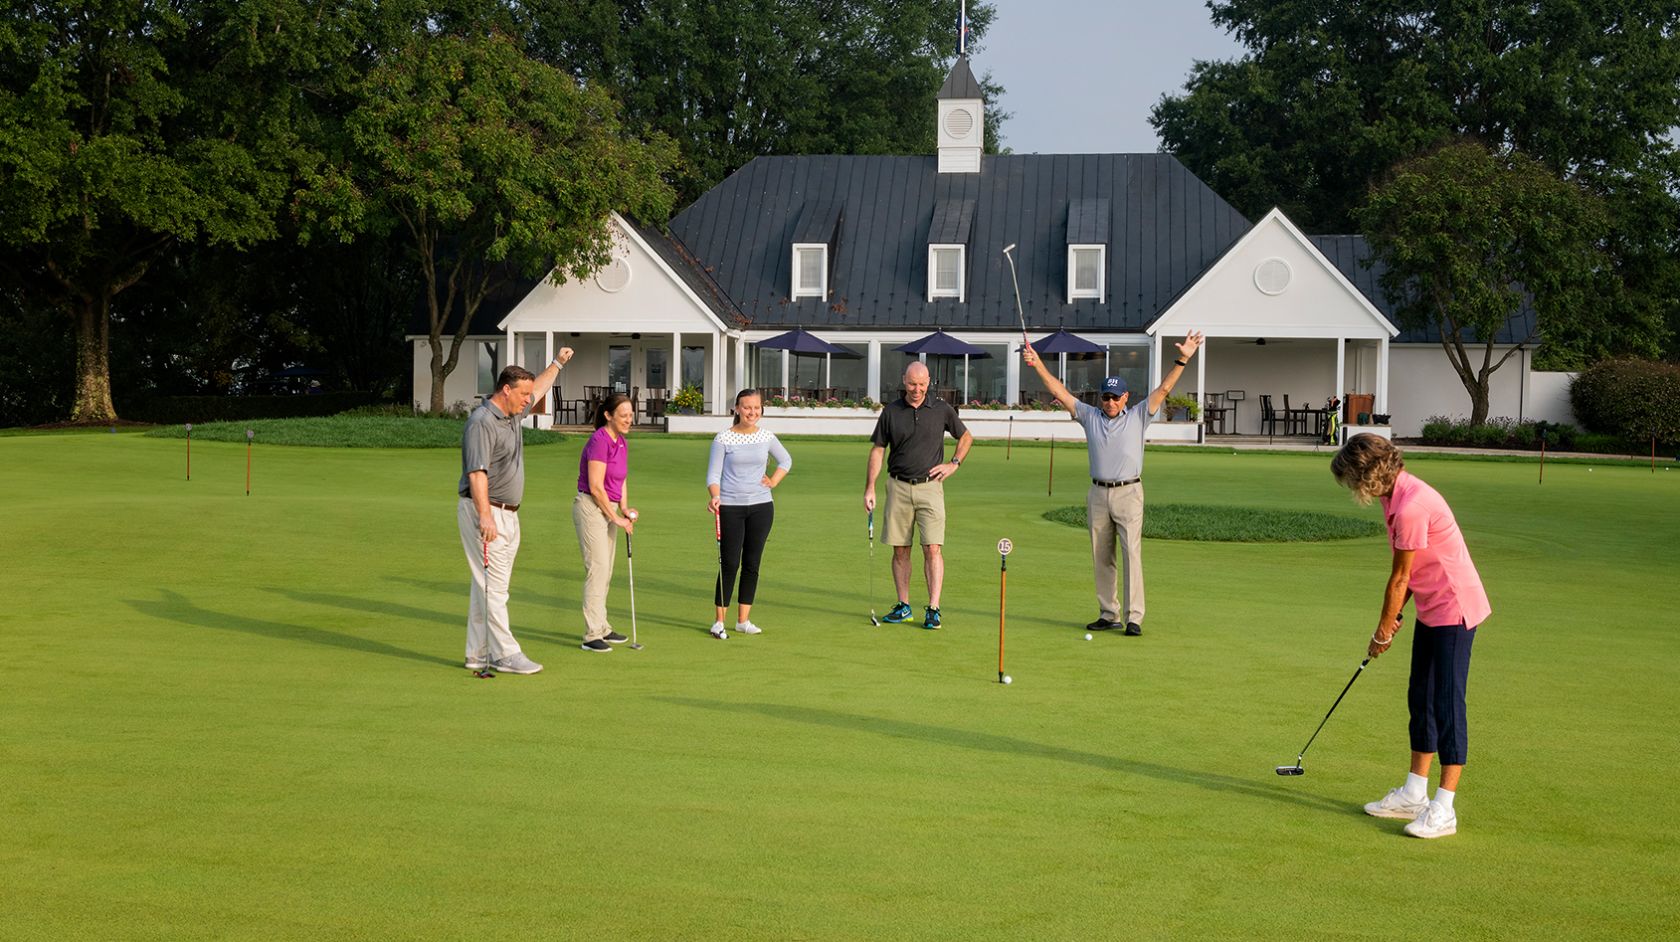 Group of people on putting green